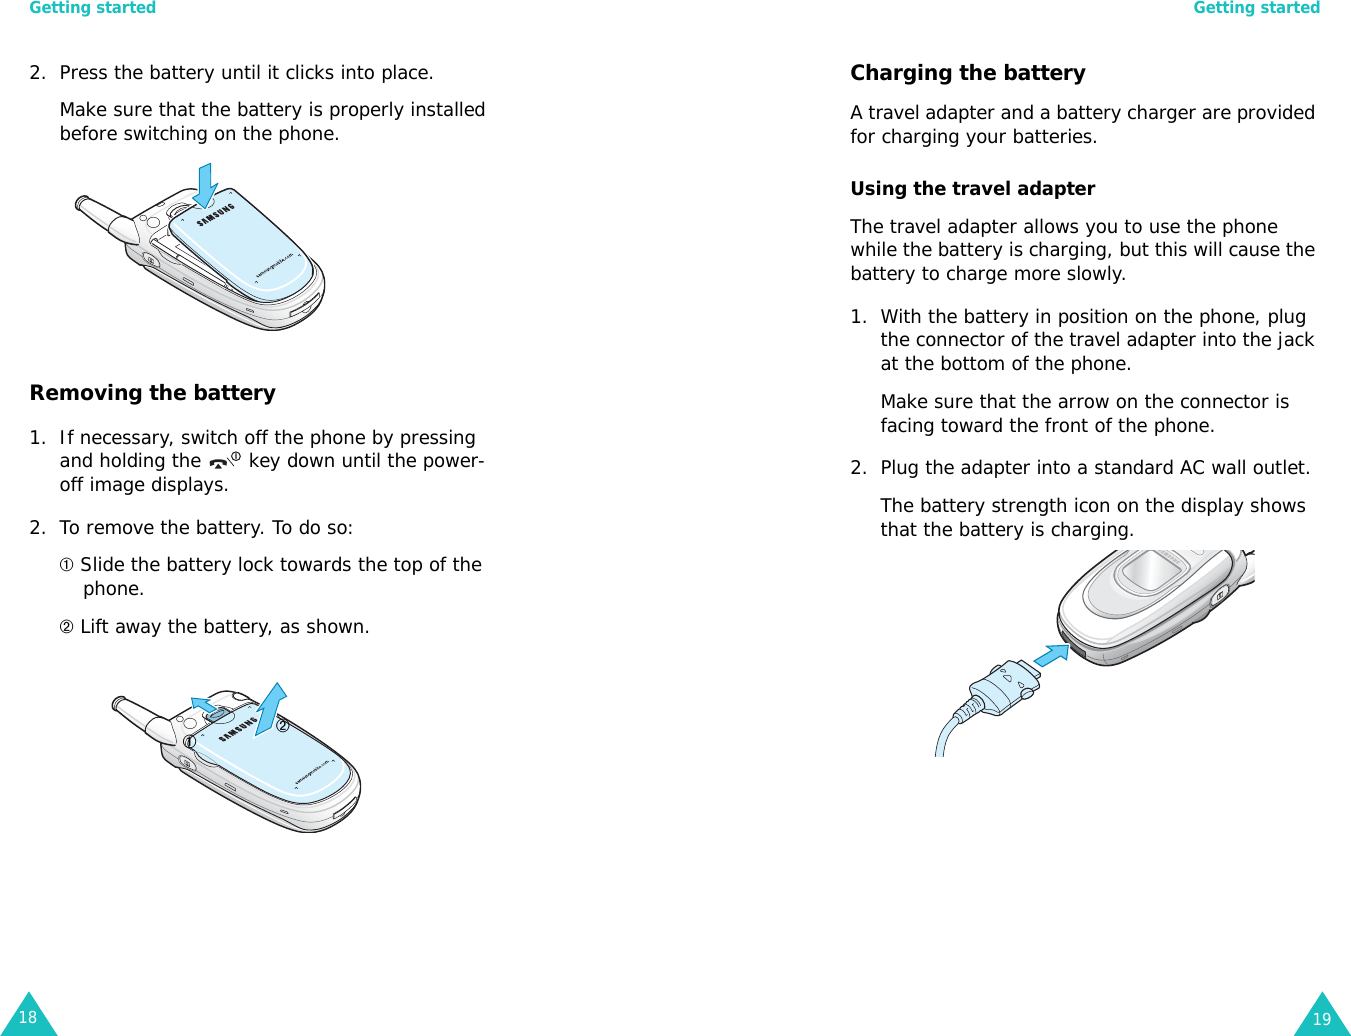 Getting started182. Press the battery until it clicks into place. Make sure that the battery is properly installed before switching on the phone.Removing the battery1. If necessary, switch off the phone by pressing and holding the   key down until the power-off image displays.2. To remove the battery. To do so:➀ Slide the battery lock towards the top of the phone.➁ Lift away the battery, as shown.➀➁Getting started19Charging the batteryA travel adapter and a battery charger are provided for charging your batteries.Using the travel adapterThe travel adapter allows you to use the phone while the battery is charging, but this will cause the battery to charge more slowly.1. With the battery in position on the phone, plug the connector of the travel adapter into the jack at the bottom of the phone.Make sure that the arrow on the connector is facing toward the front of the phone.2. Plug the adapter into a standard AC wall outlet.The battery strength icon on the display shows that the battery is charging.